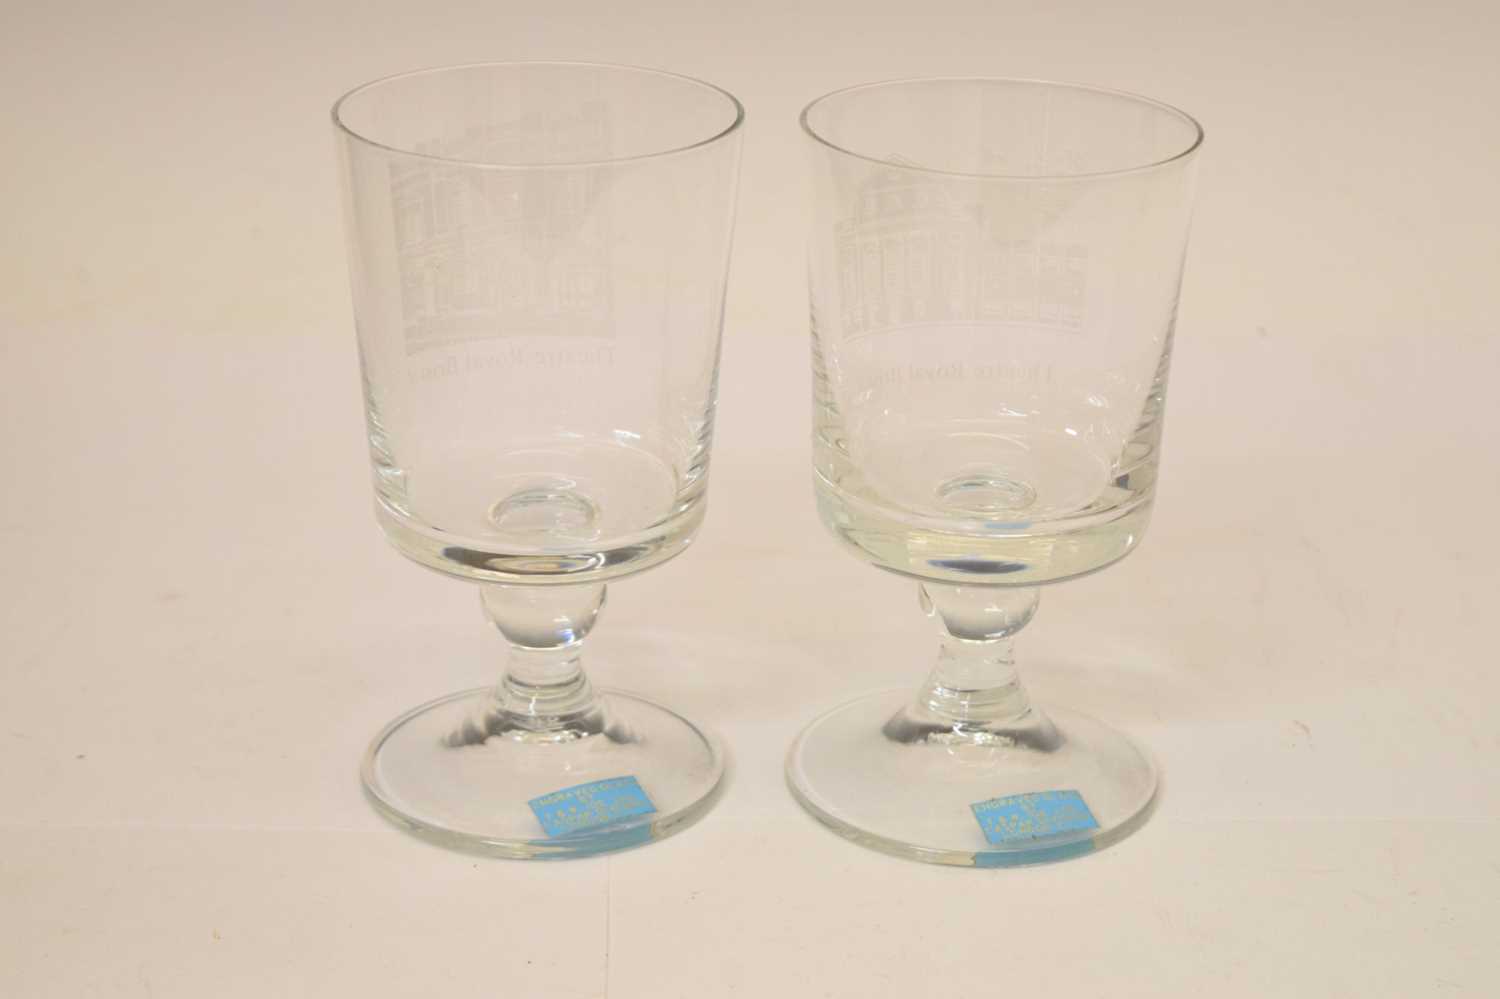 Pair of Old Vic Bristol glass commemorative goblets - Image 7 of 8